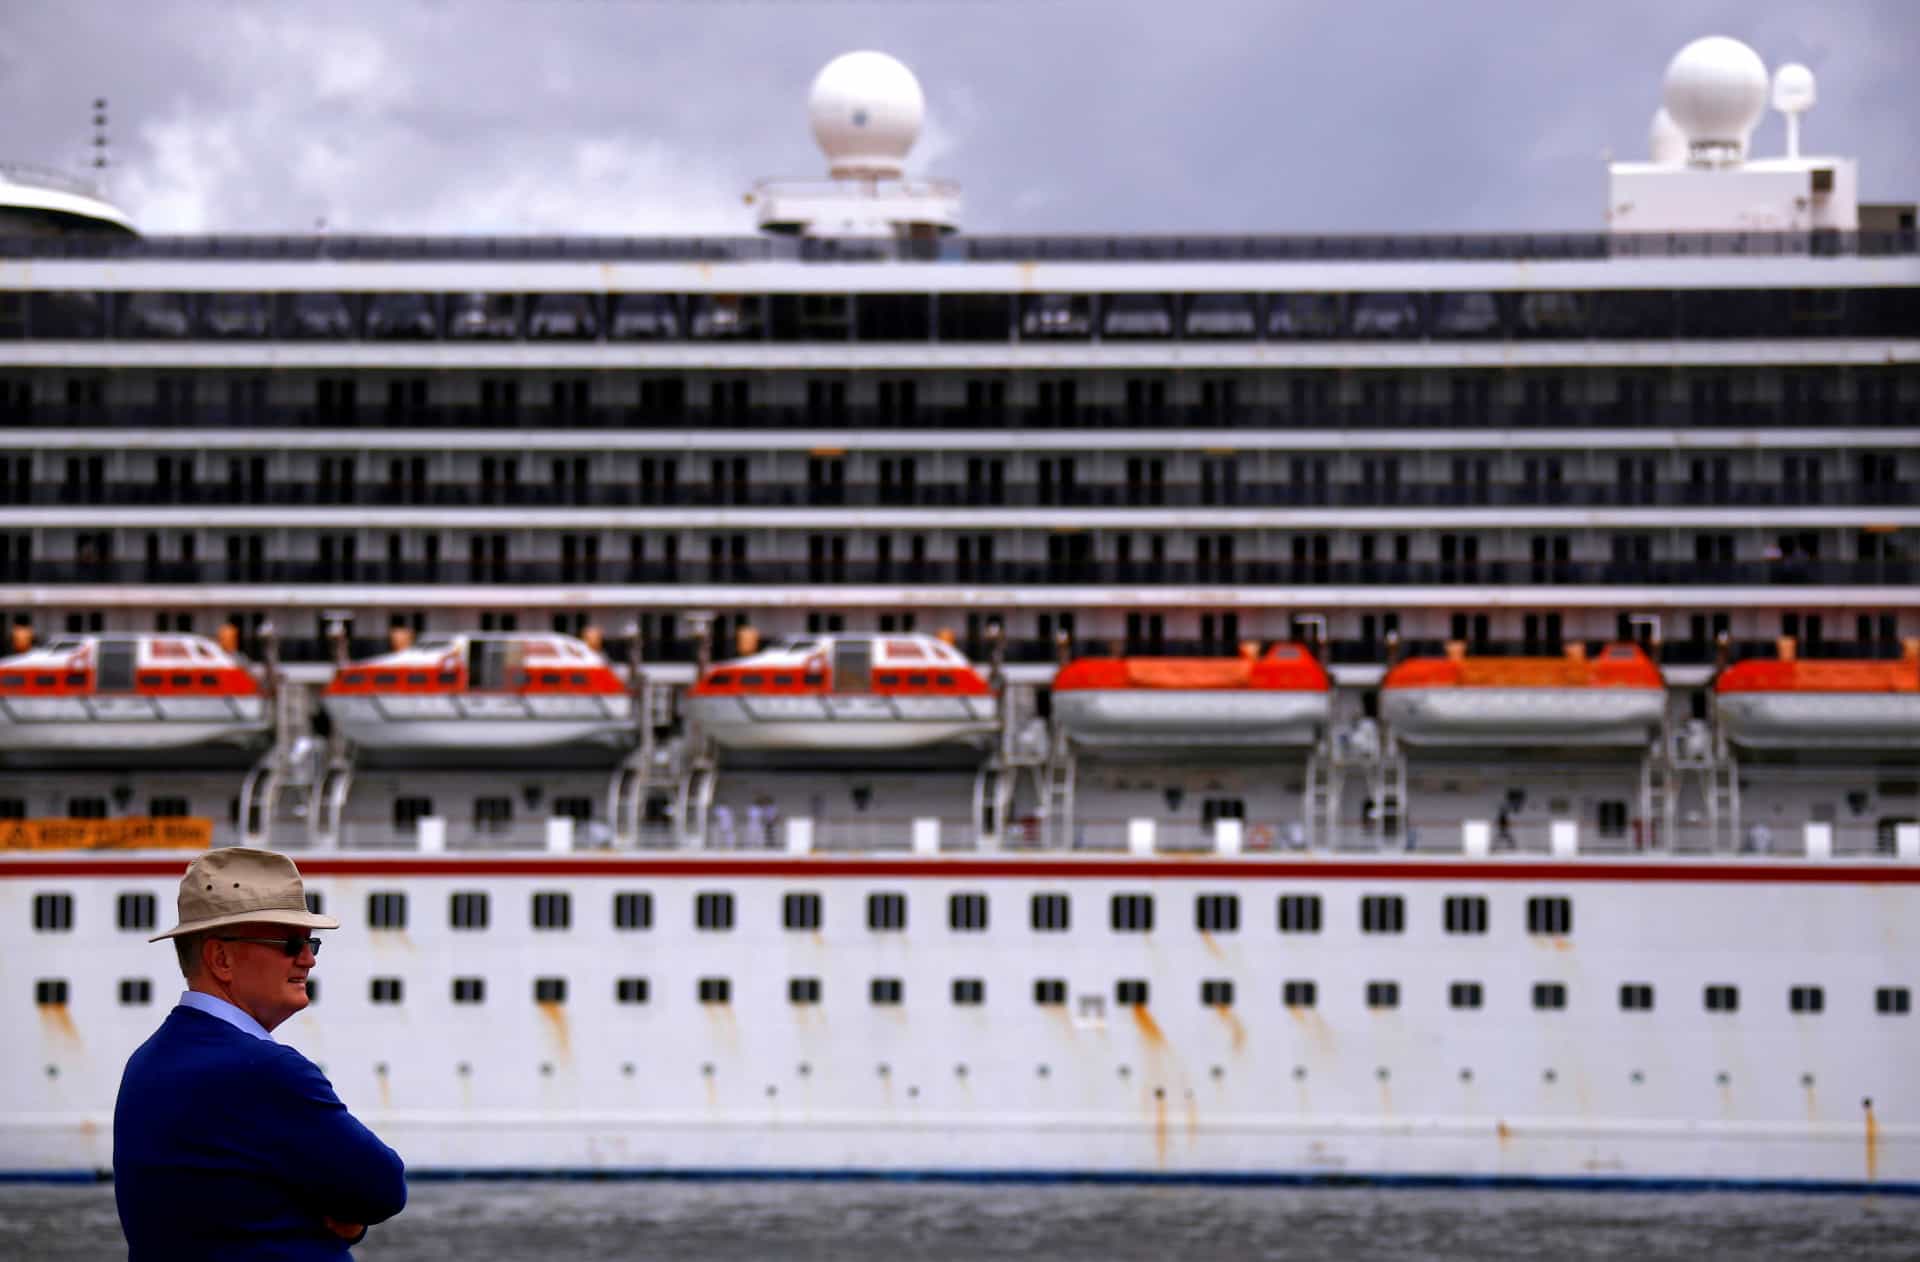 <p>Since 2000, over 200 people have gone missing from cruise ships <a href="https://www.thesun.co.uk/news/3857853/cruise-ship-killer-fears-passengers-vanish-rebecca-coriam-missing/" rel="noopener">according to Dr. Ross Klein</a>, author of 'Cruise Ship Blues: The Underside of the Cruise Ship Industry.'</p>